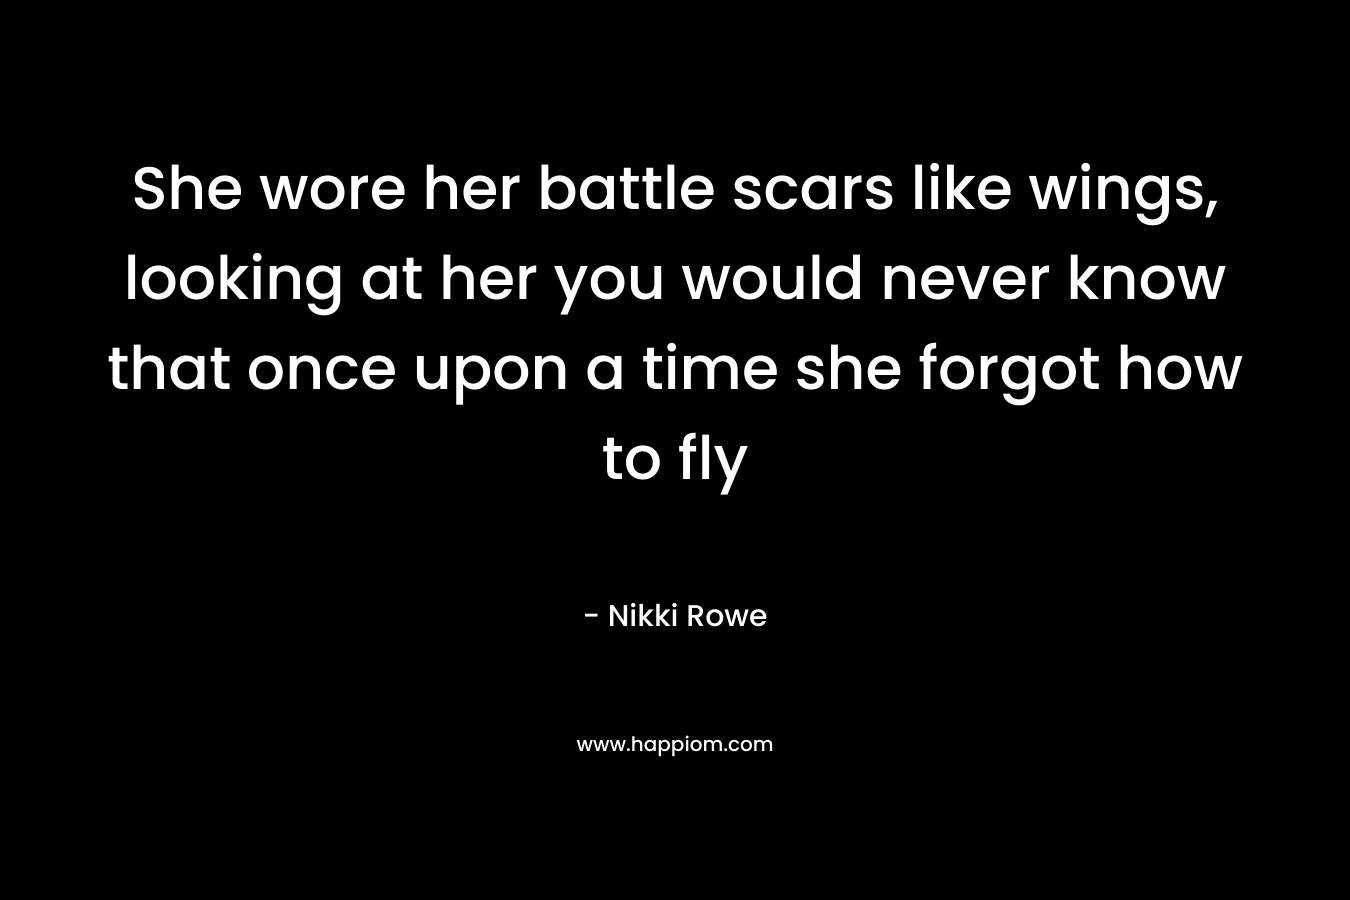 She wore her battle scars like wings, looking at her you would never know that once upon a time she forgot how to fly – Nikki Rowe